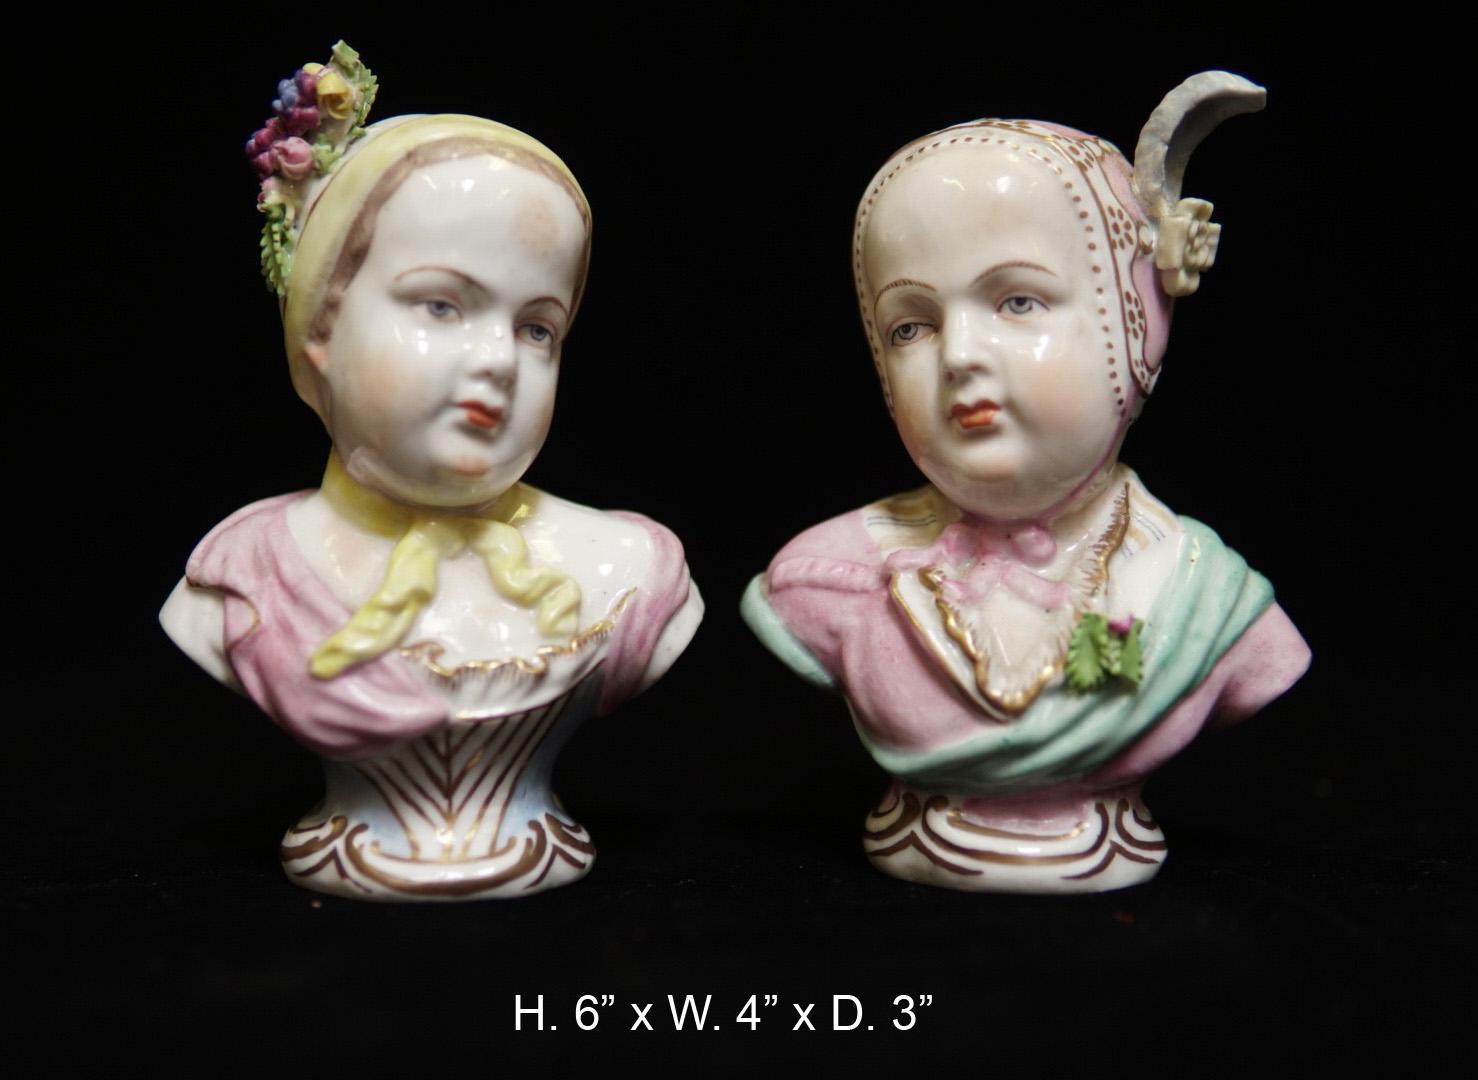 Pair of fine quality German glazed and hand painted porcelain bust of babies bearing an underglazed blue mark in the back,
First half of the 20th century.

Each bust wearing a floral and fruit decorated hat. Meticulous attention was given to the